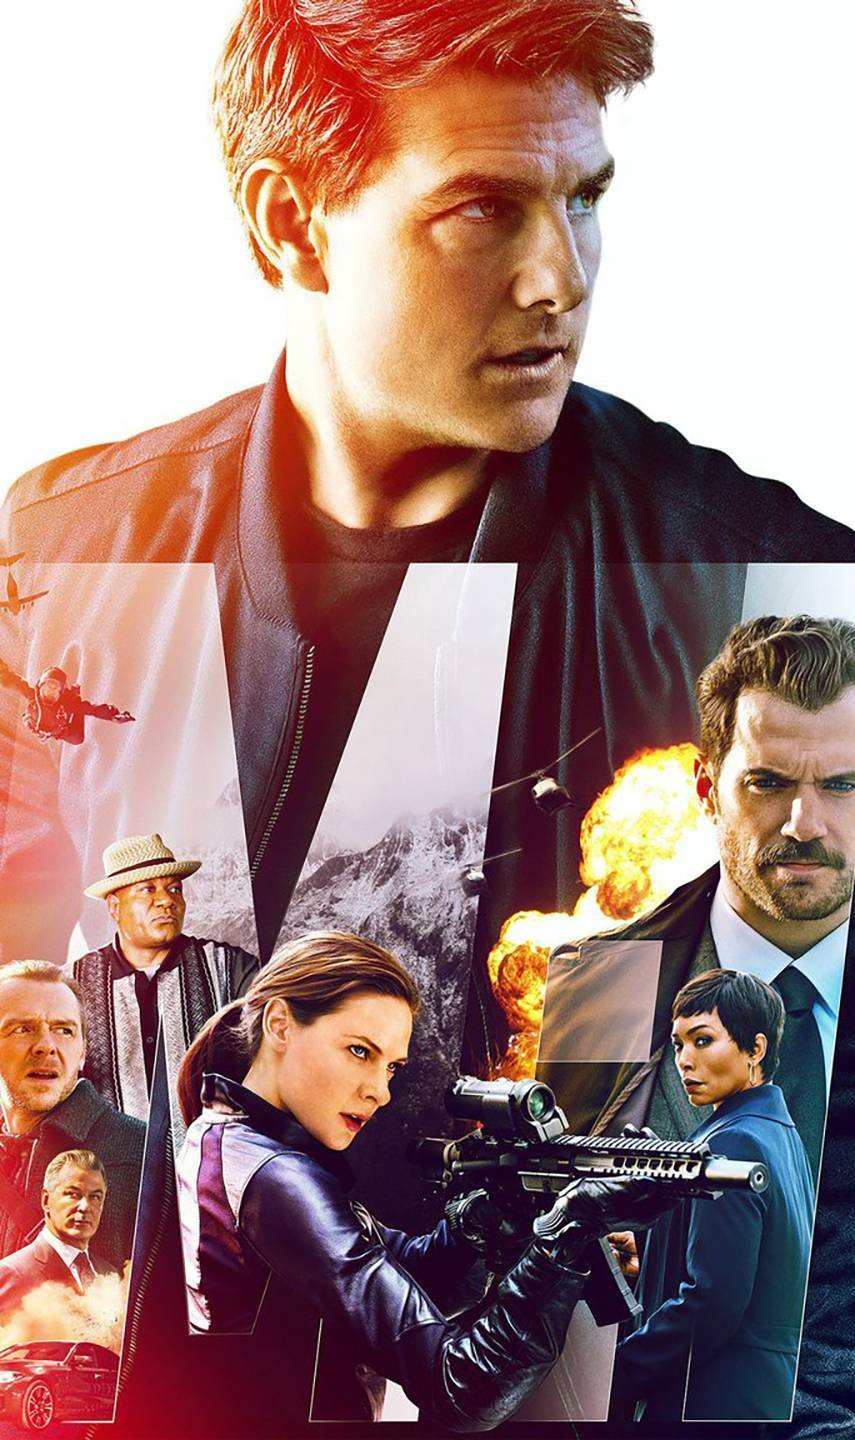 MISSION IMPOSSIBLE 6: Fallout (2018) Full Movie Download ...